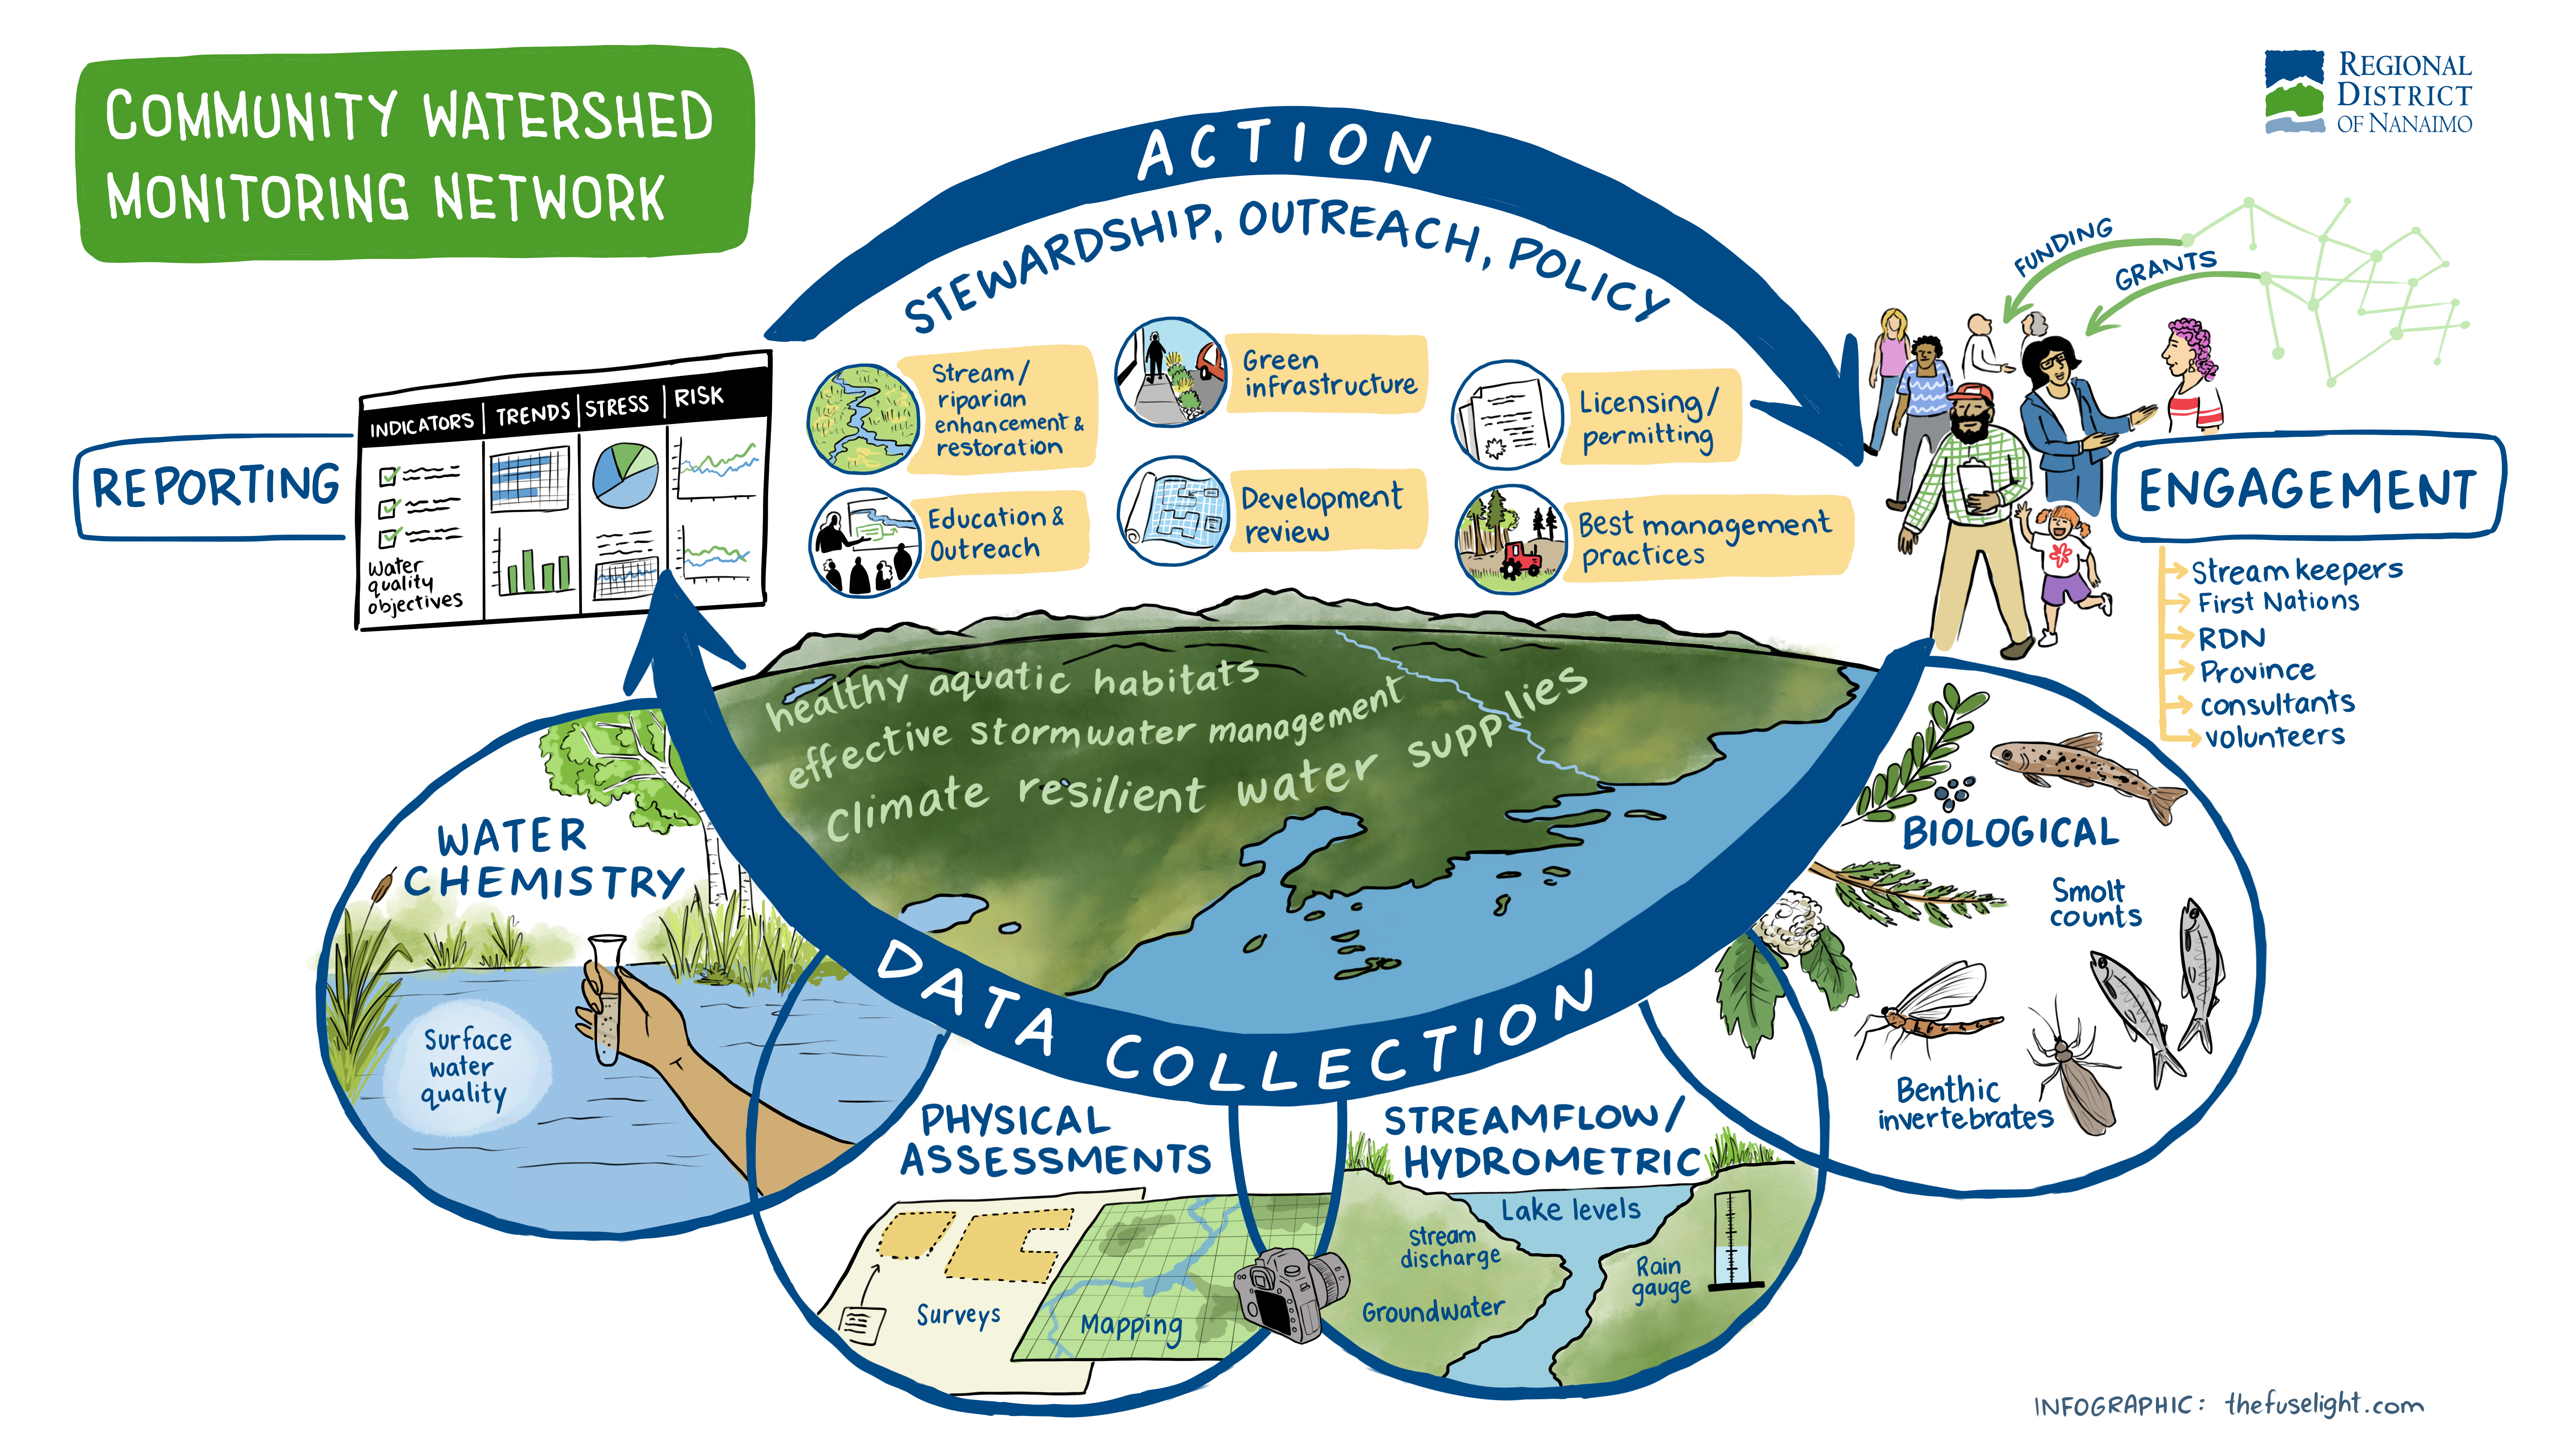 Community Watershed Monitoring Network